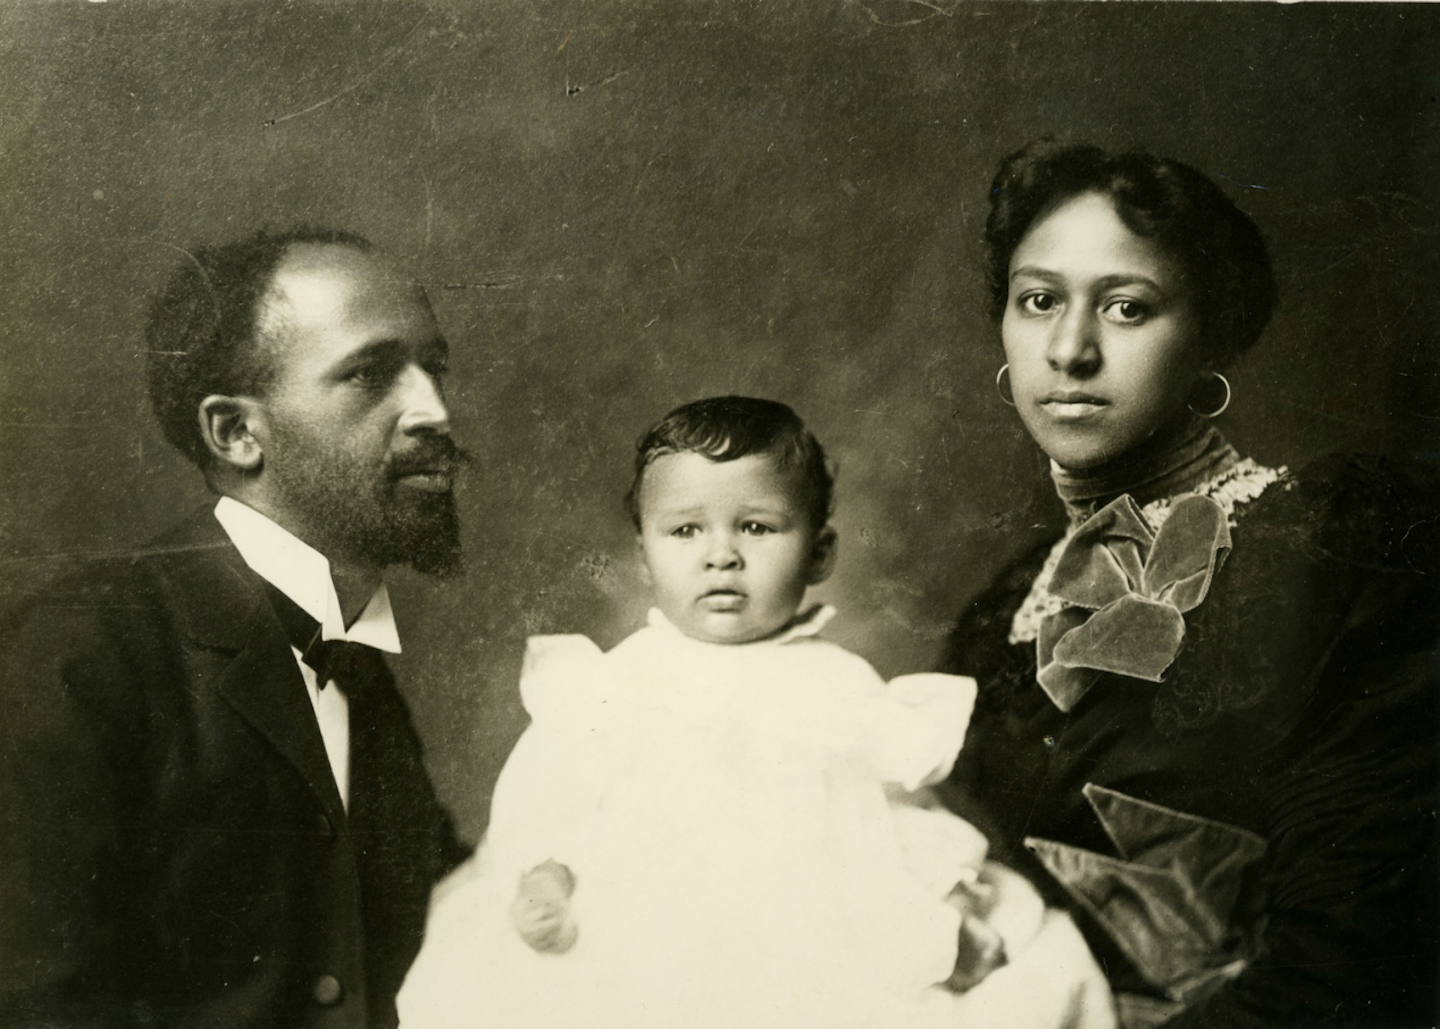 Family portrait of W.E.B. Du Bois, his wife Nina, and their baby son Burghardt in 1898.